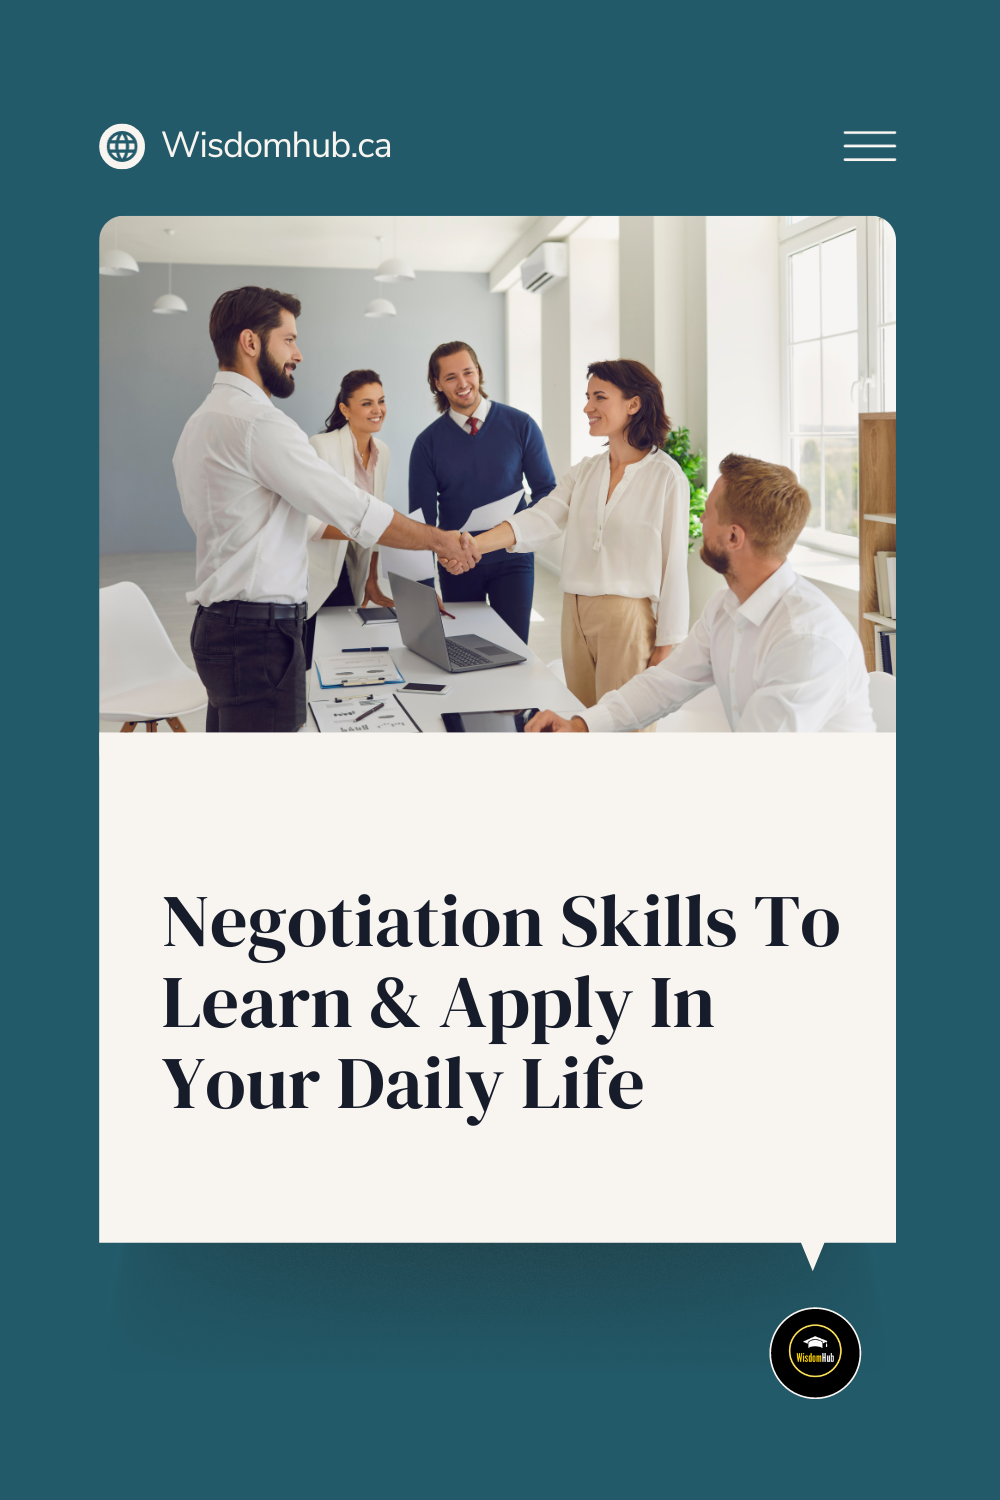 Negotiation Skills To Learn & Apply In Your Daily Life